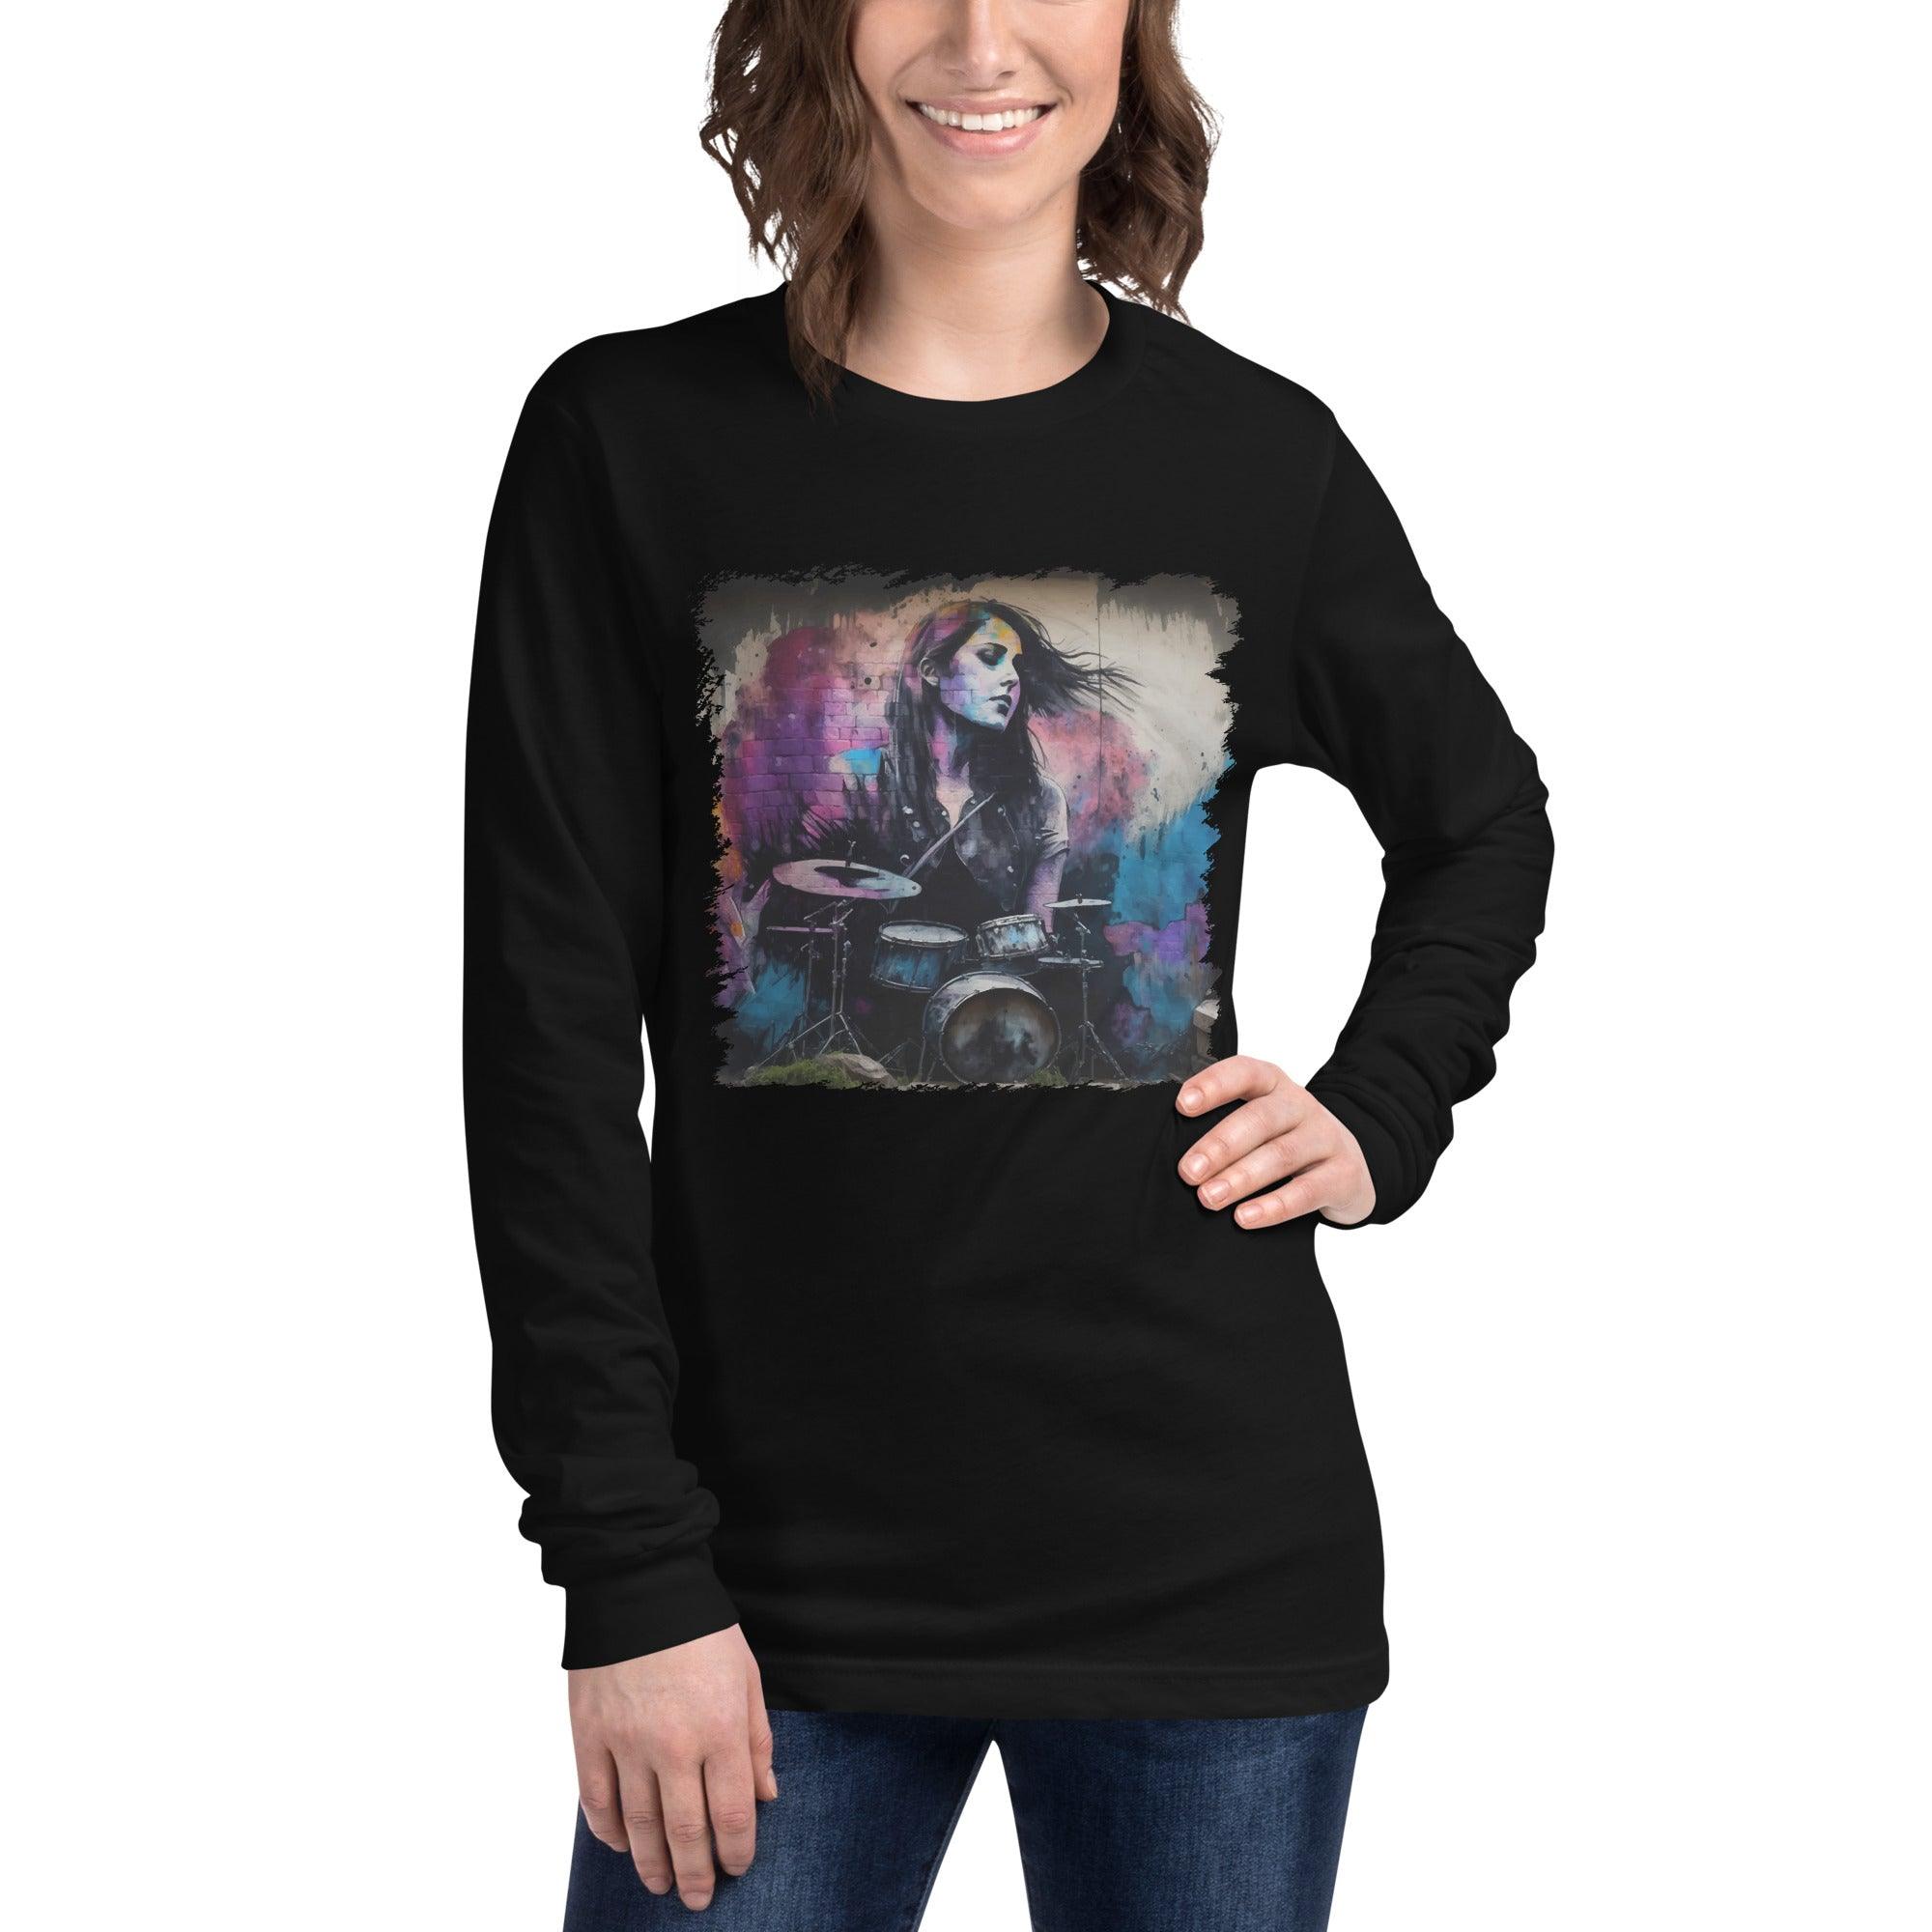 She Drums With Power Unisex Long Sleeve Tee - Beyond T-shirts